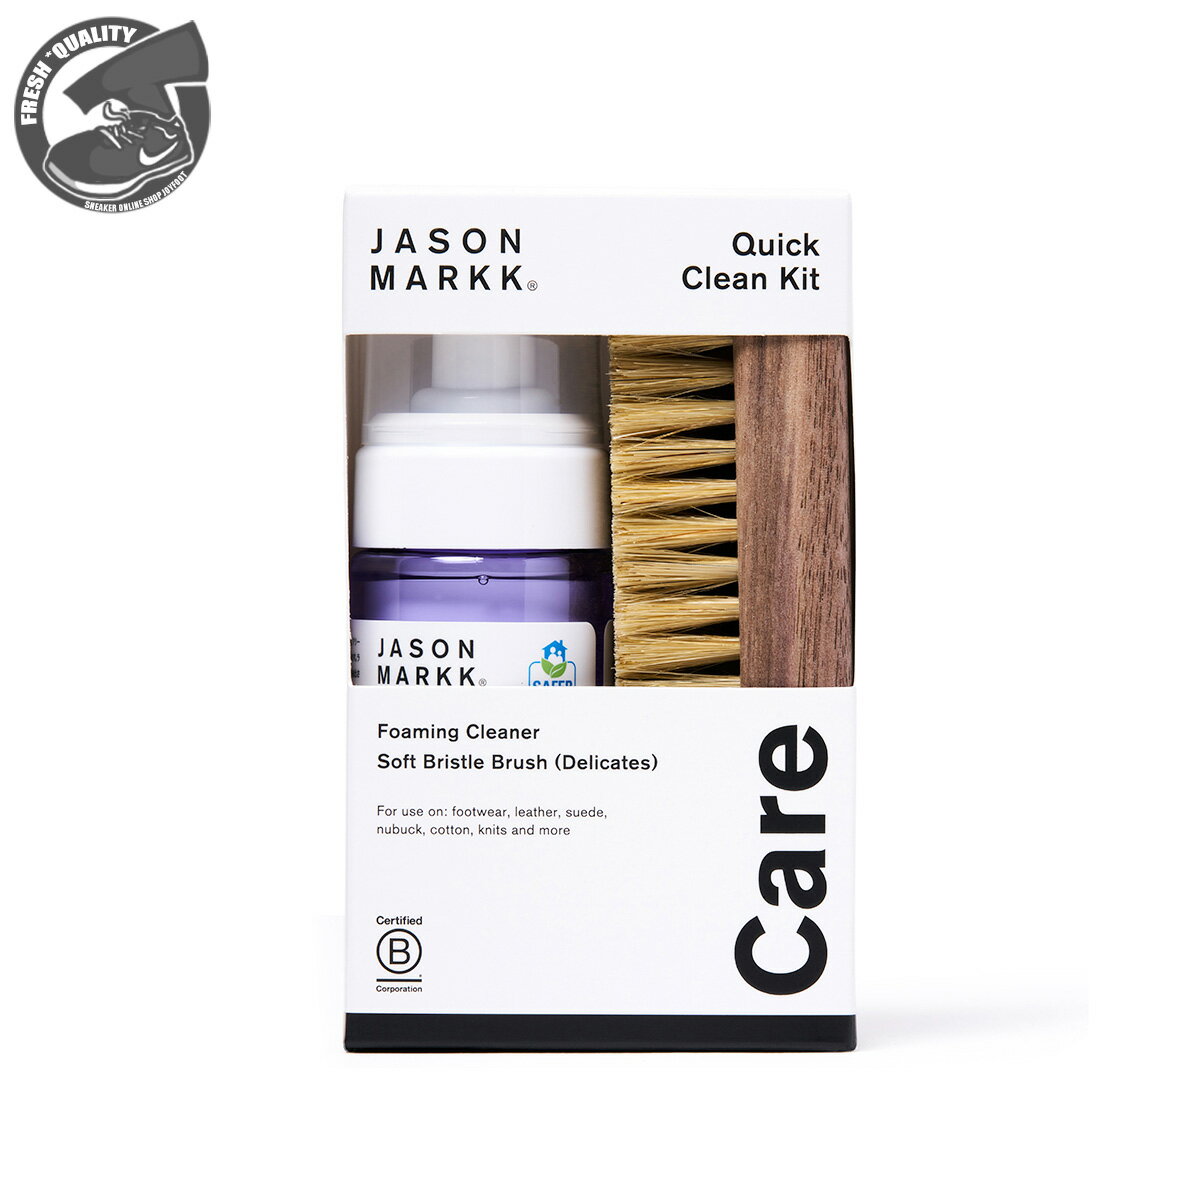 JASON MARKK QUICK CLEAN KIT 310620 ジェイソンマーク クイック クリーン キット 必要なときにすぐに使えるクリーニングキット プレゼント ギフト 贈り物 スニーカーケア用品